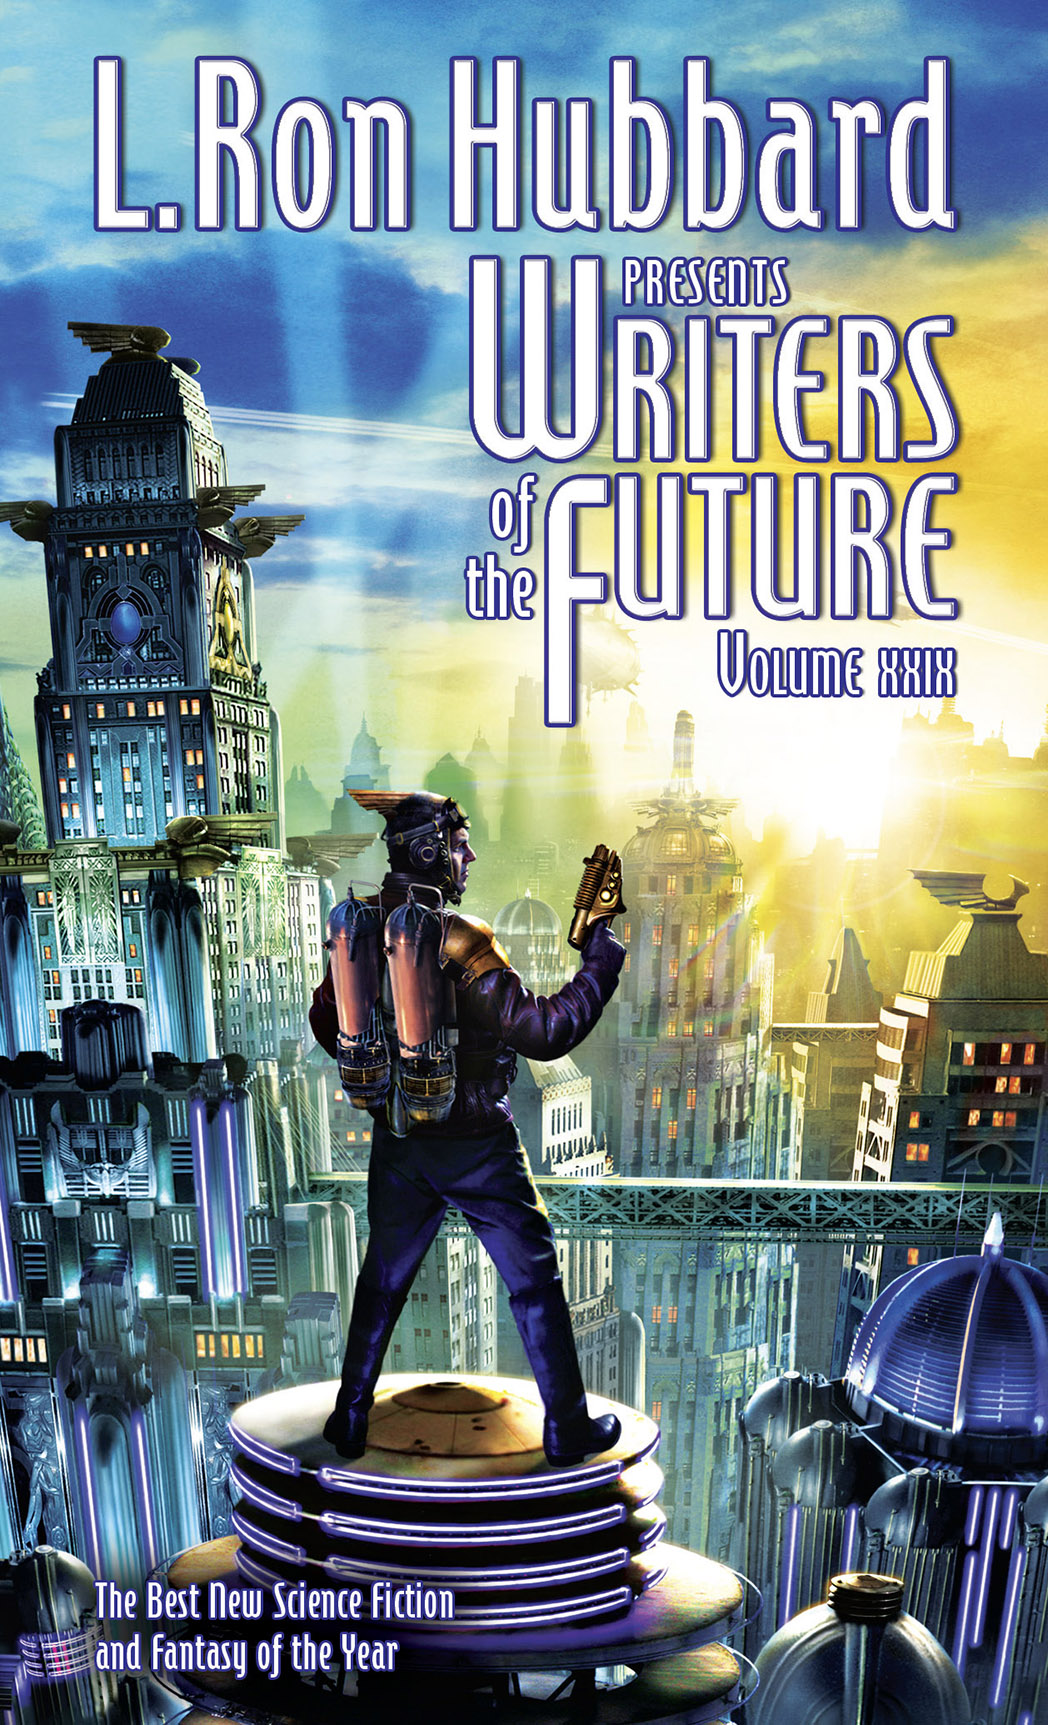 Writers of the Future, Volume 29 (2013) by L. Ron Hubbard